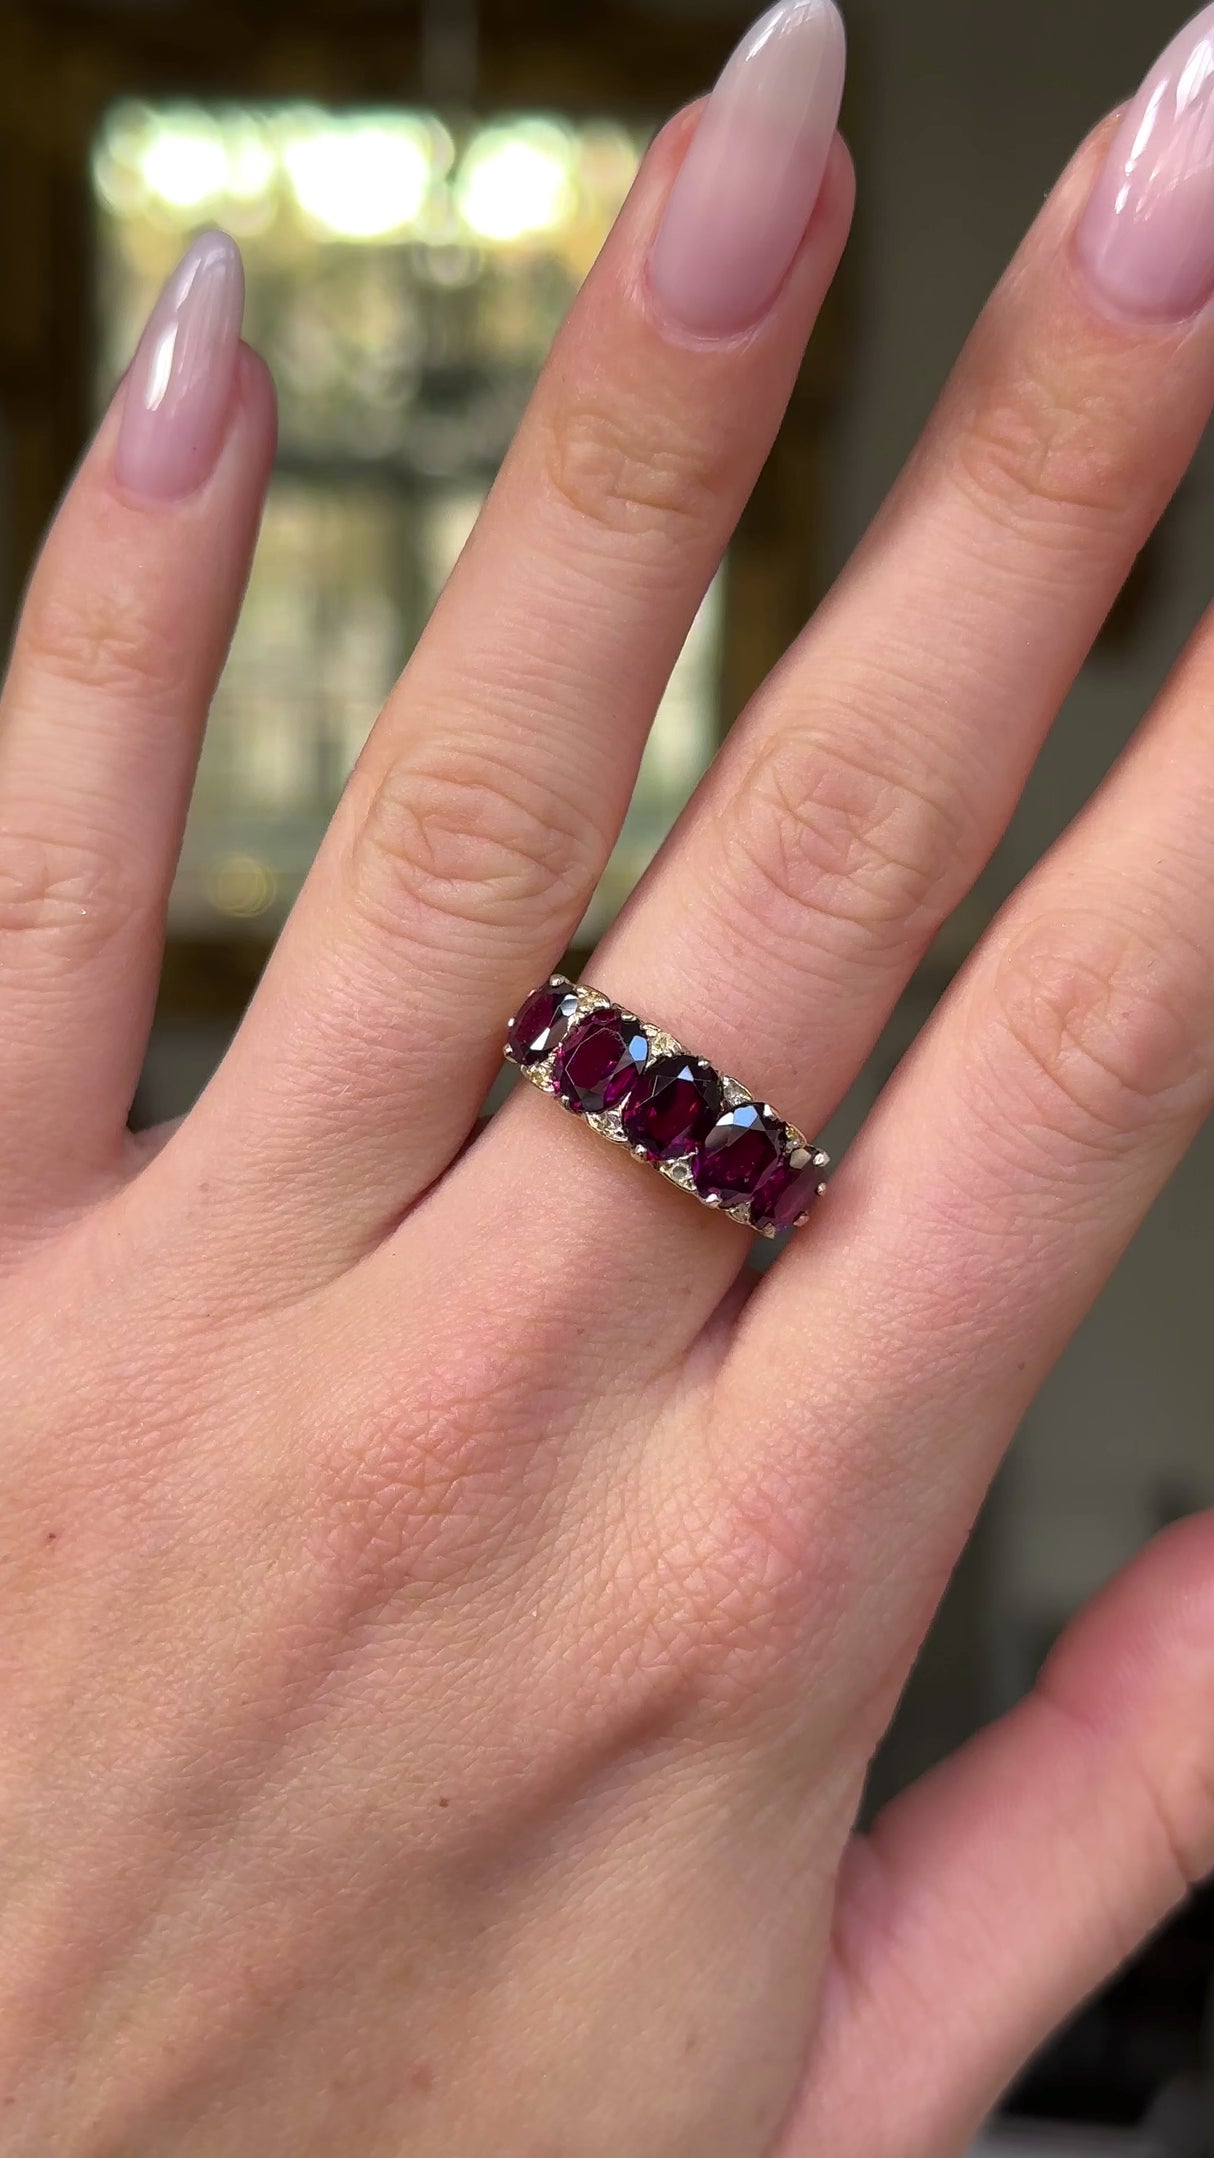 Victorian half hoop garnet ring worn on hand and moved around to give perspective.